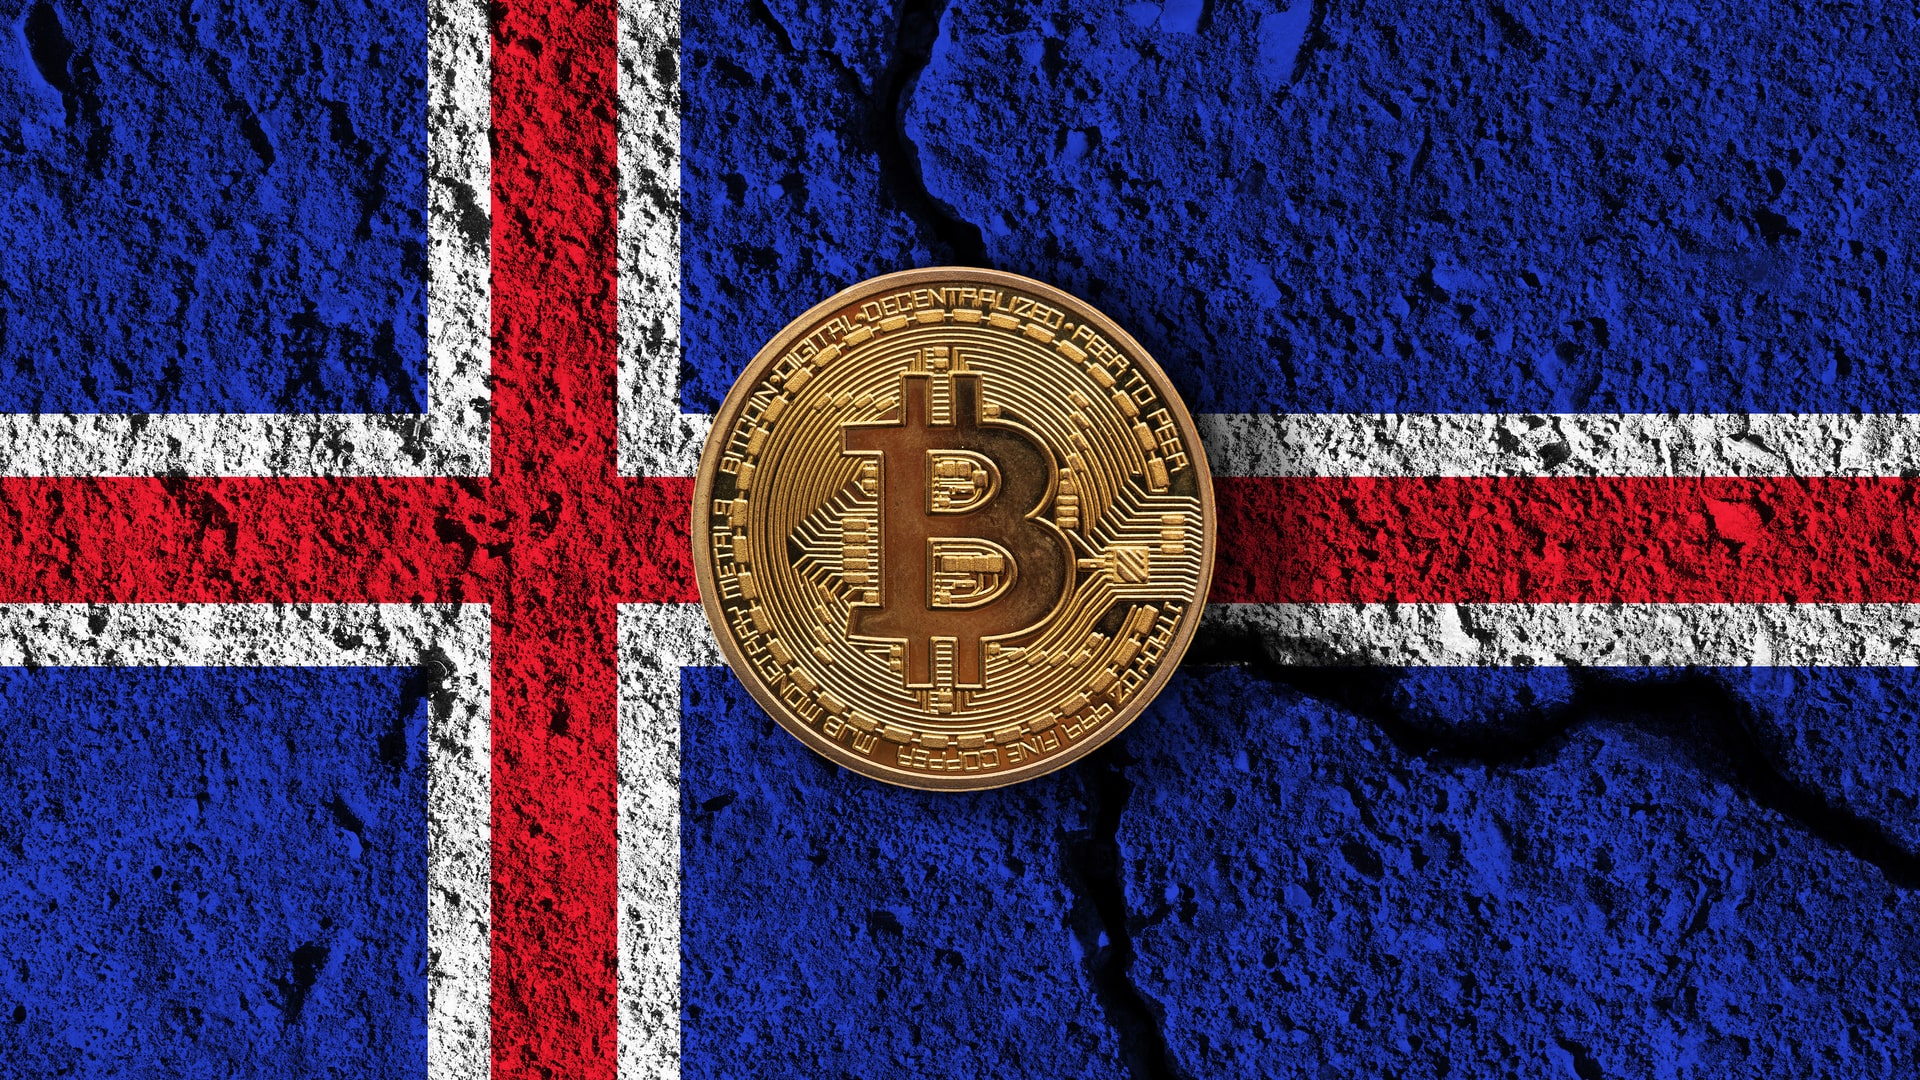 Iceland is struggling with electricity shortages – cryptocurrency production is likely to be limited